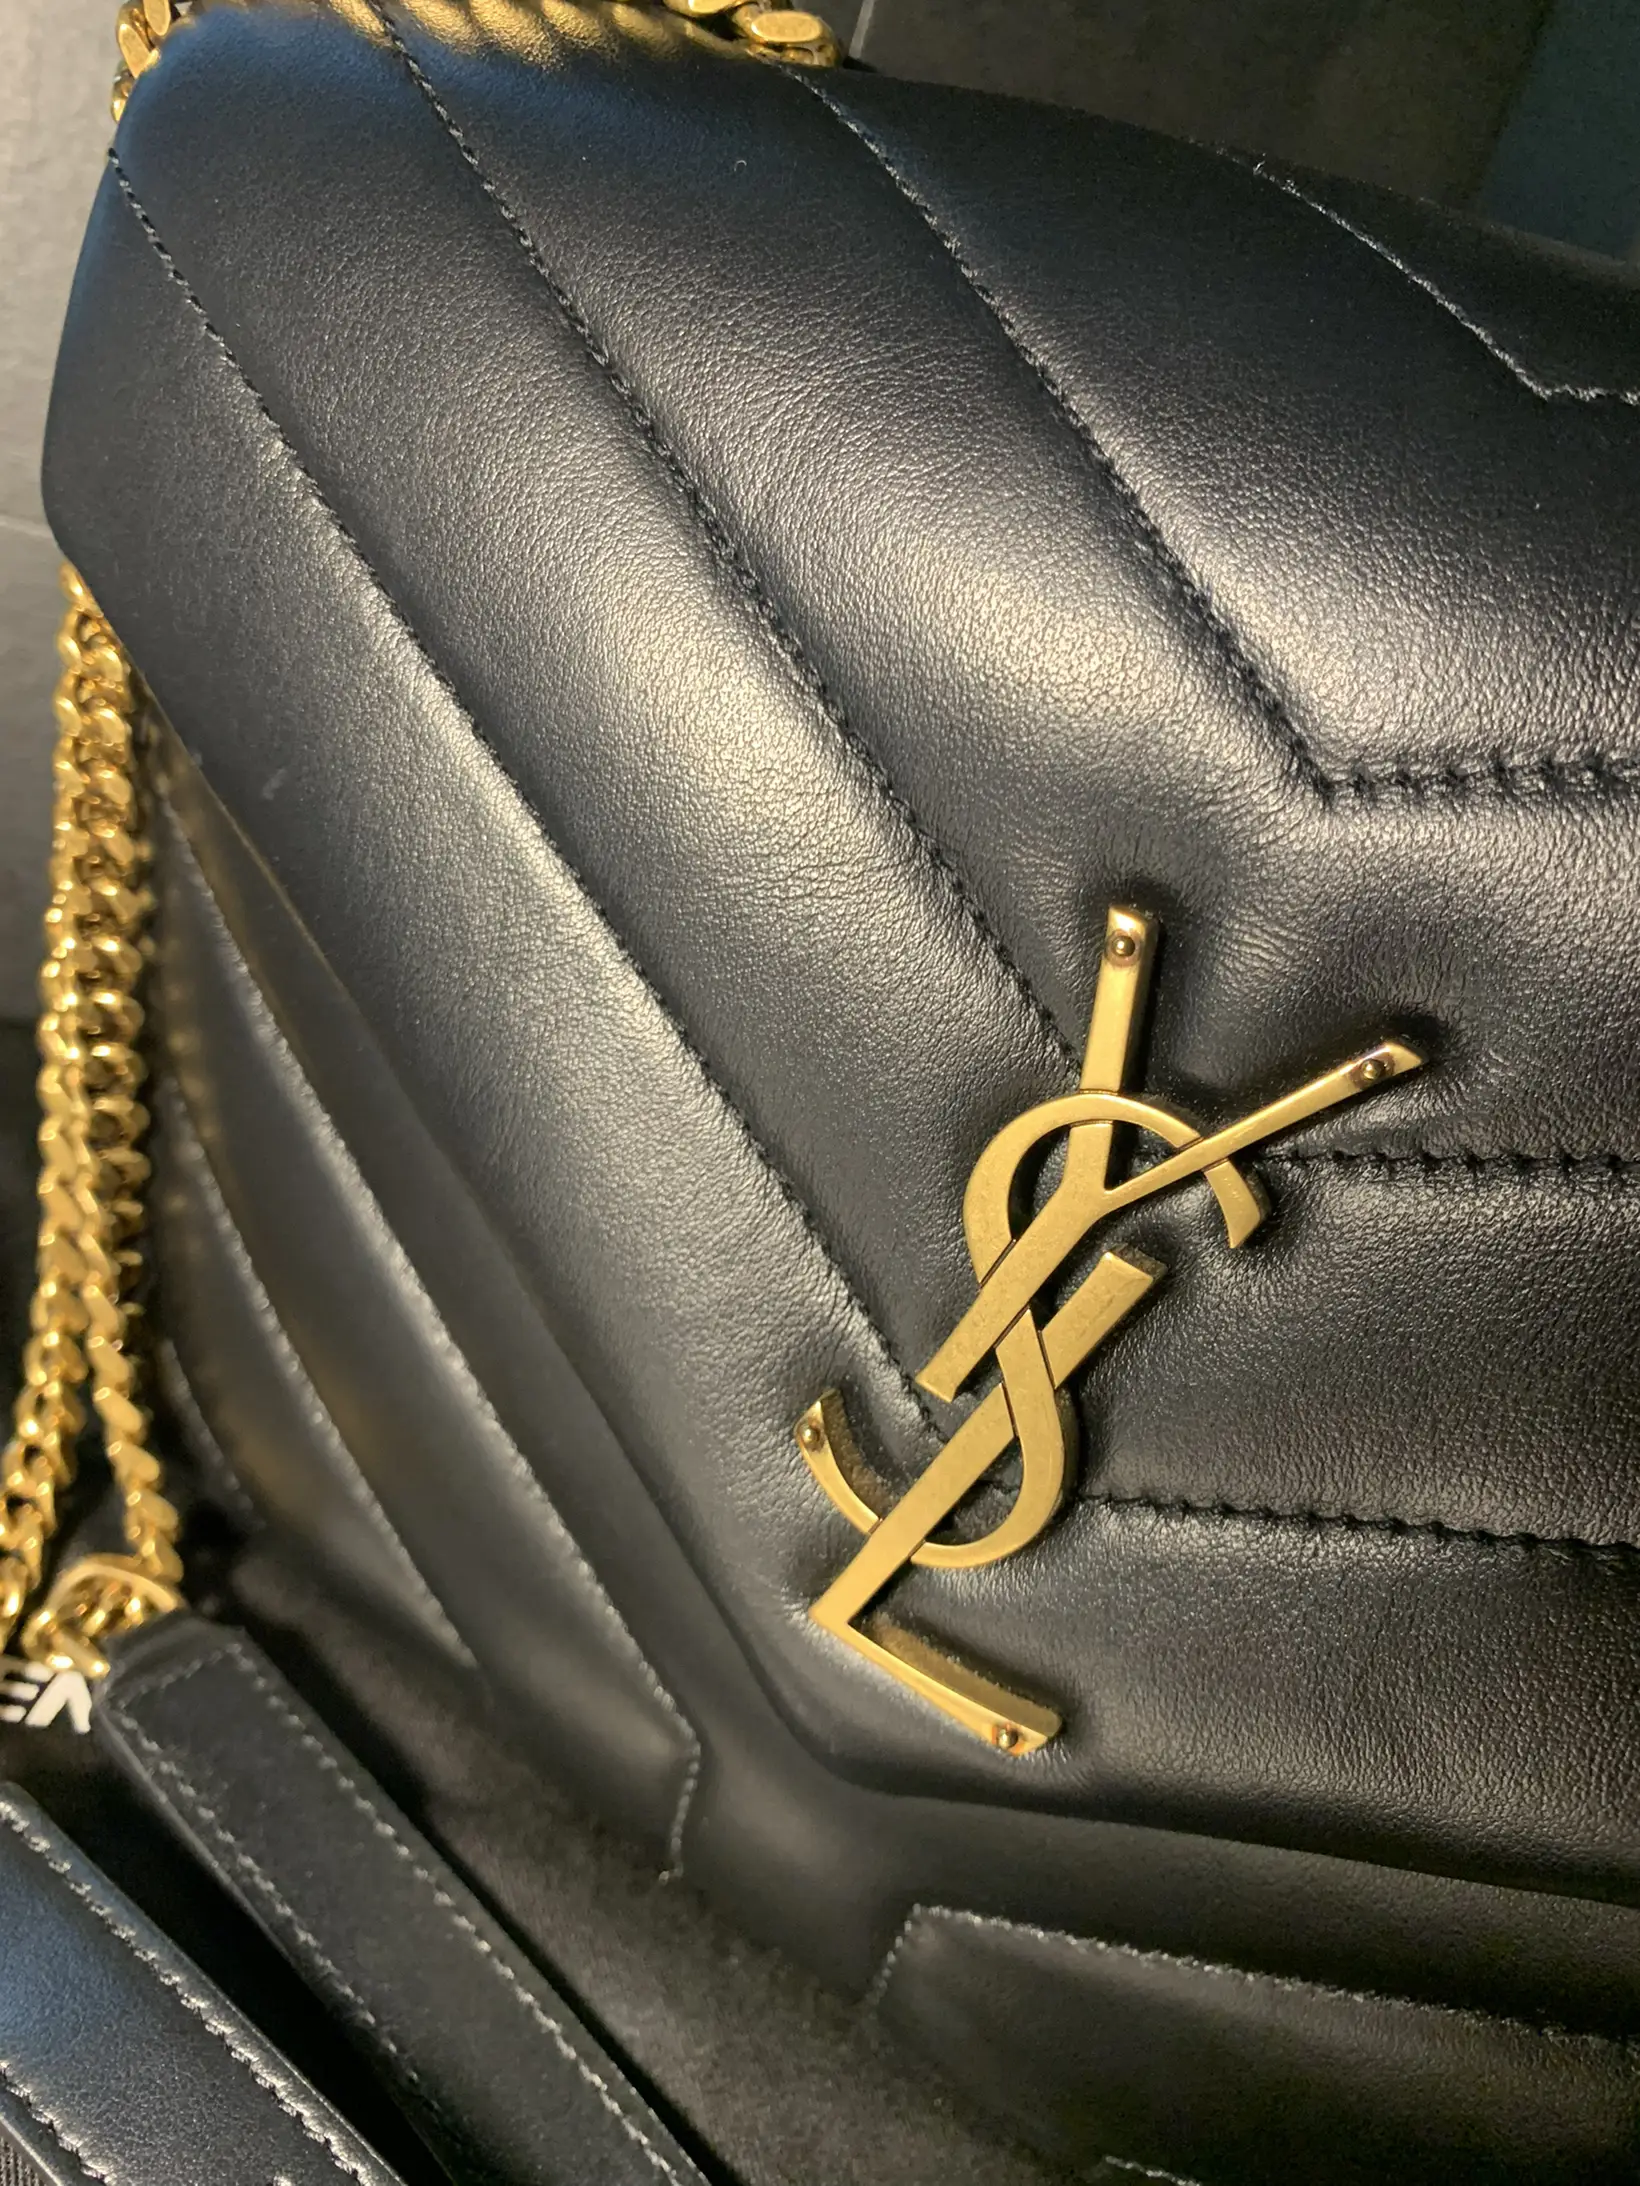 YSL Sunset Bag Review + Luxury Unboxing & What Fits 